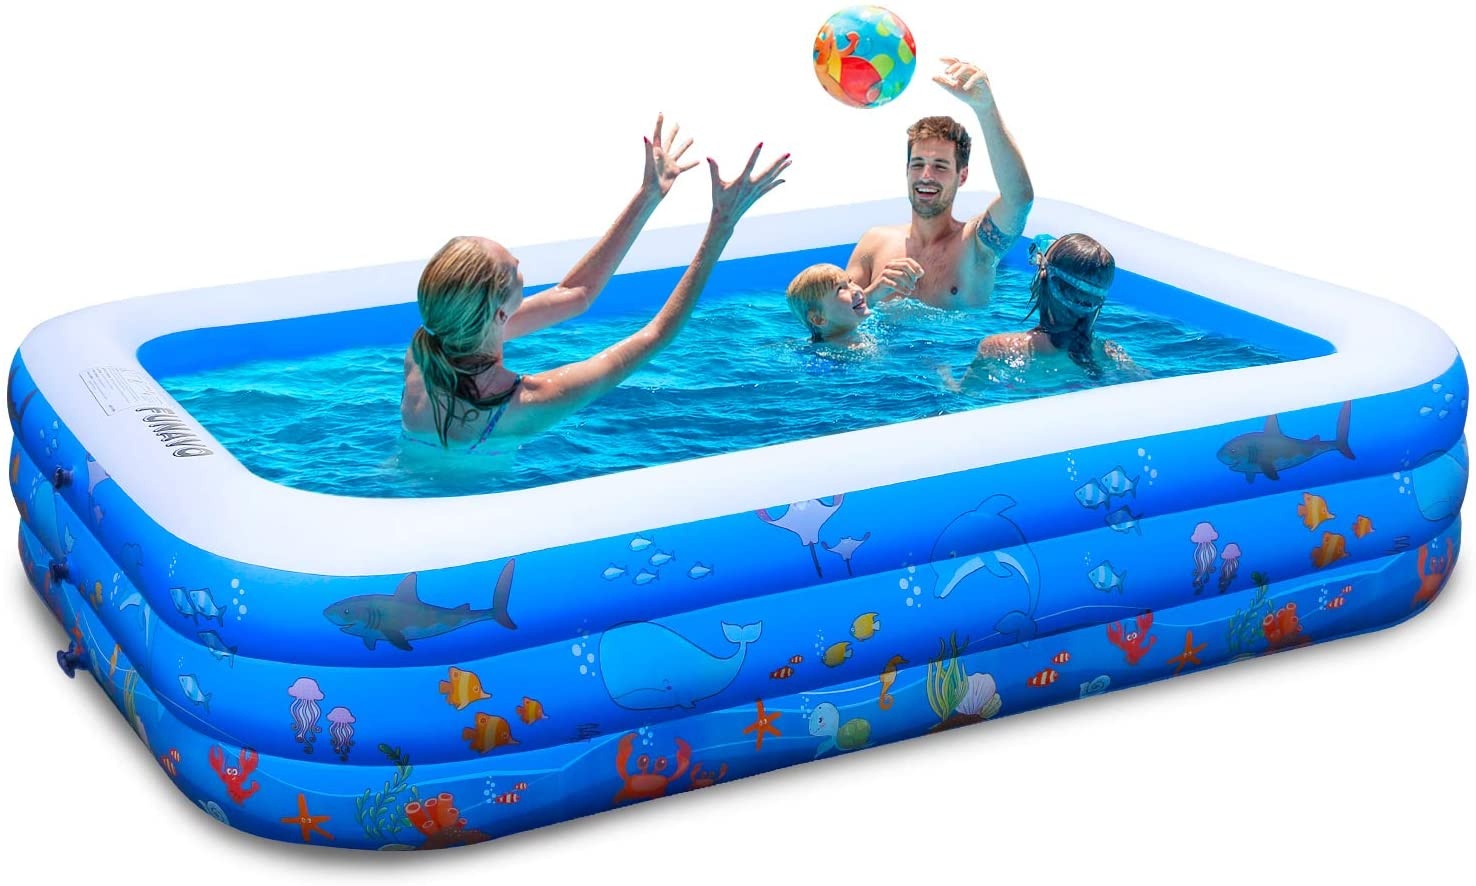 Family swimming pool Inflatable pool for family and children suitable in gardens backyards and outdoor summer water parties